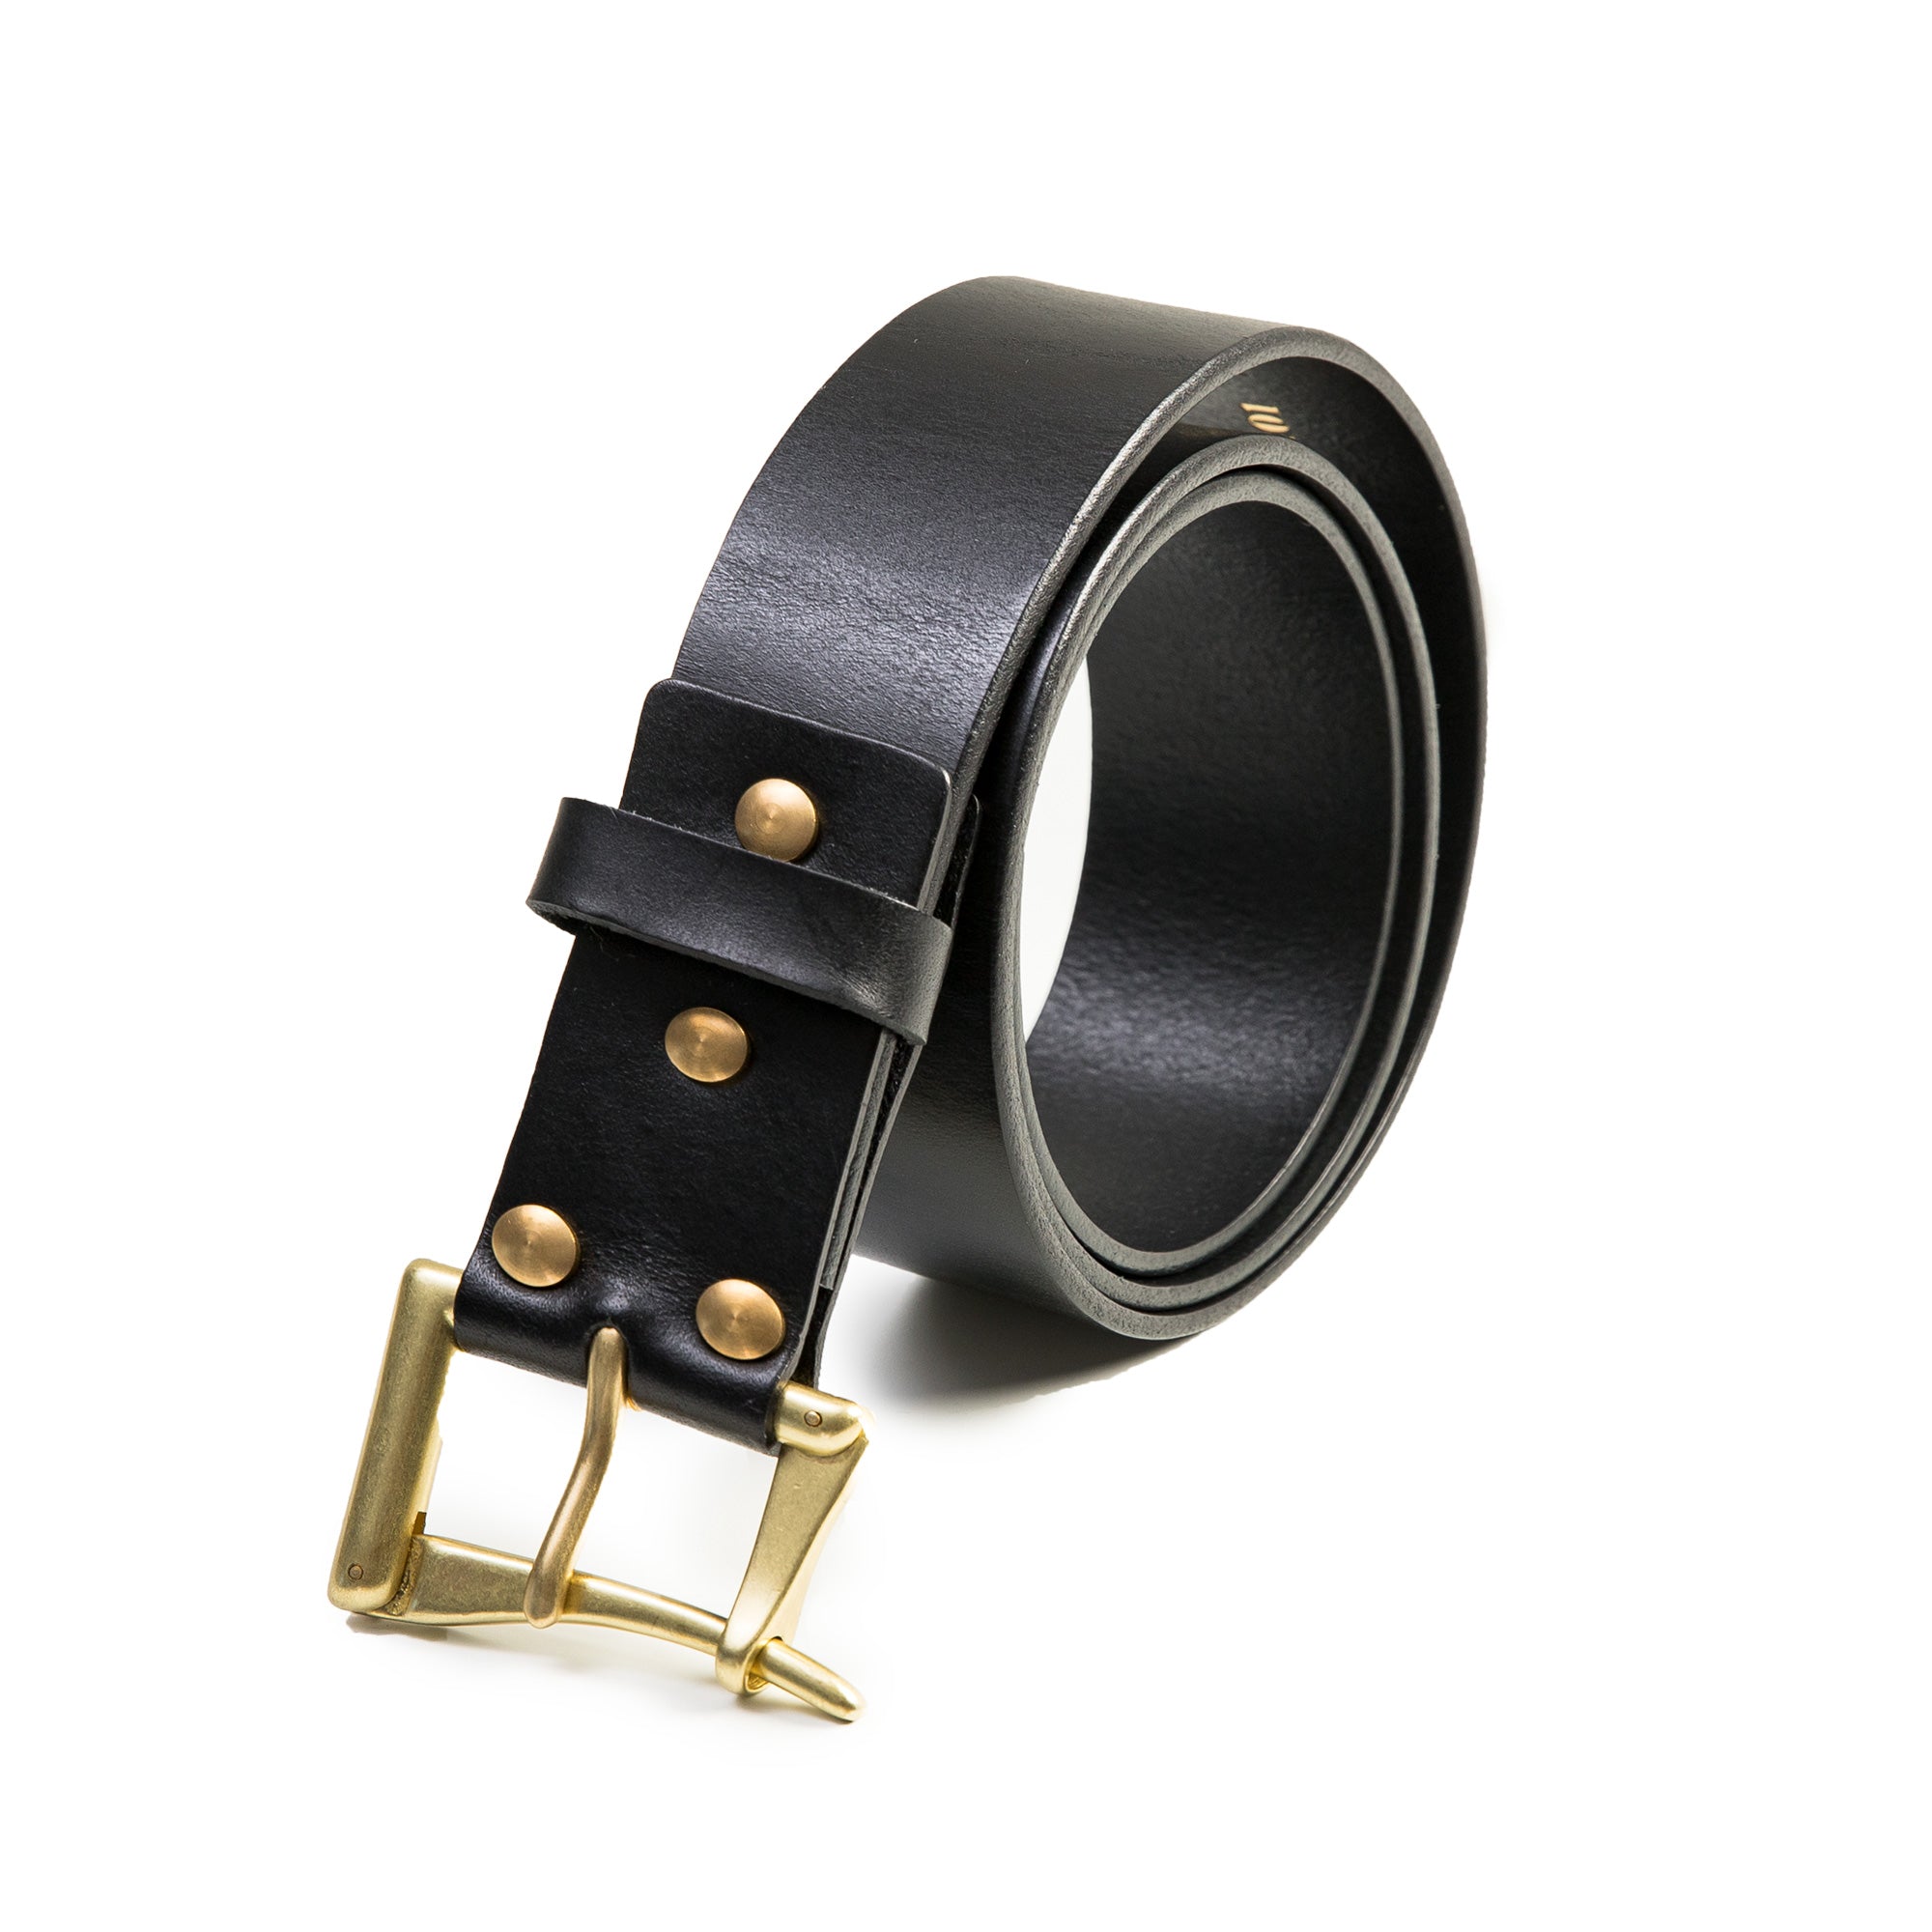 Handmade Retro Brass Belt with Quick Release Buckle Madden Tooling